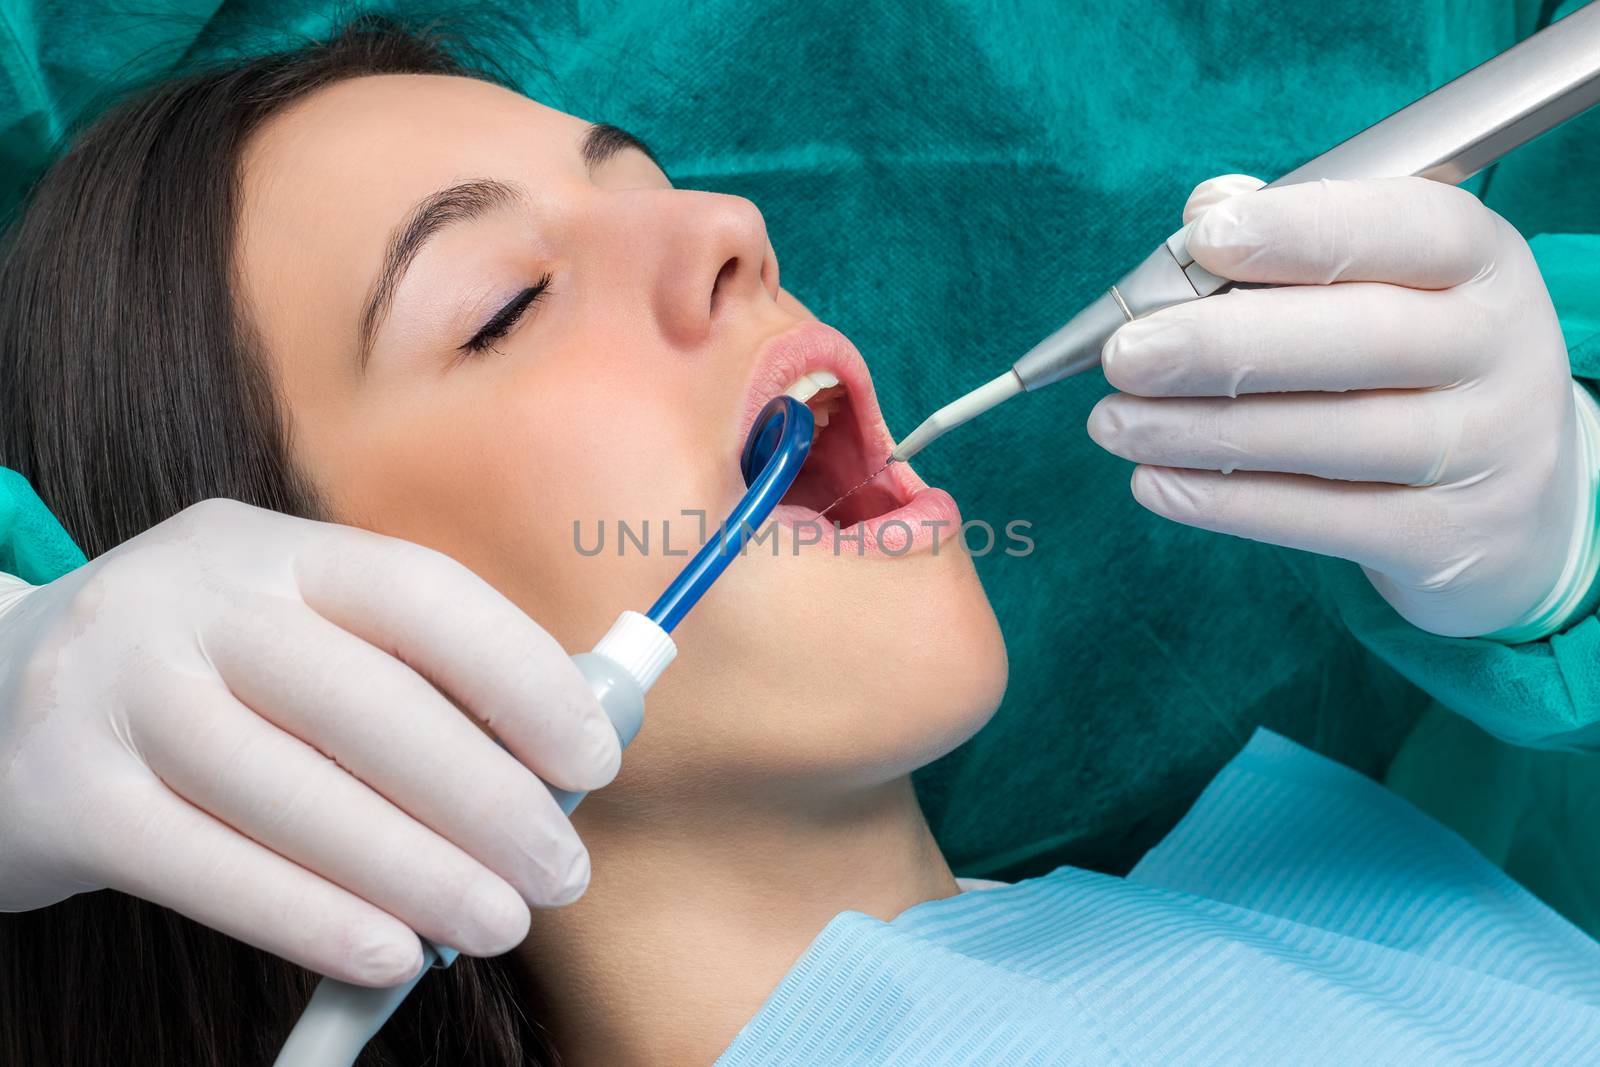 Close up macro face shot of young woman having dental cleaning.Hands wearing gloves working on teeth with saliva ejector and water cleaning unit.